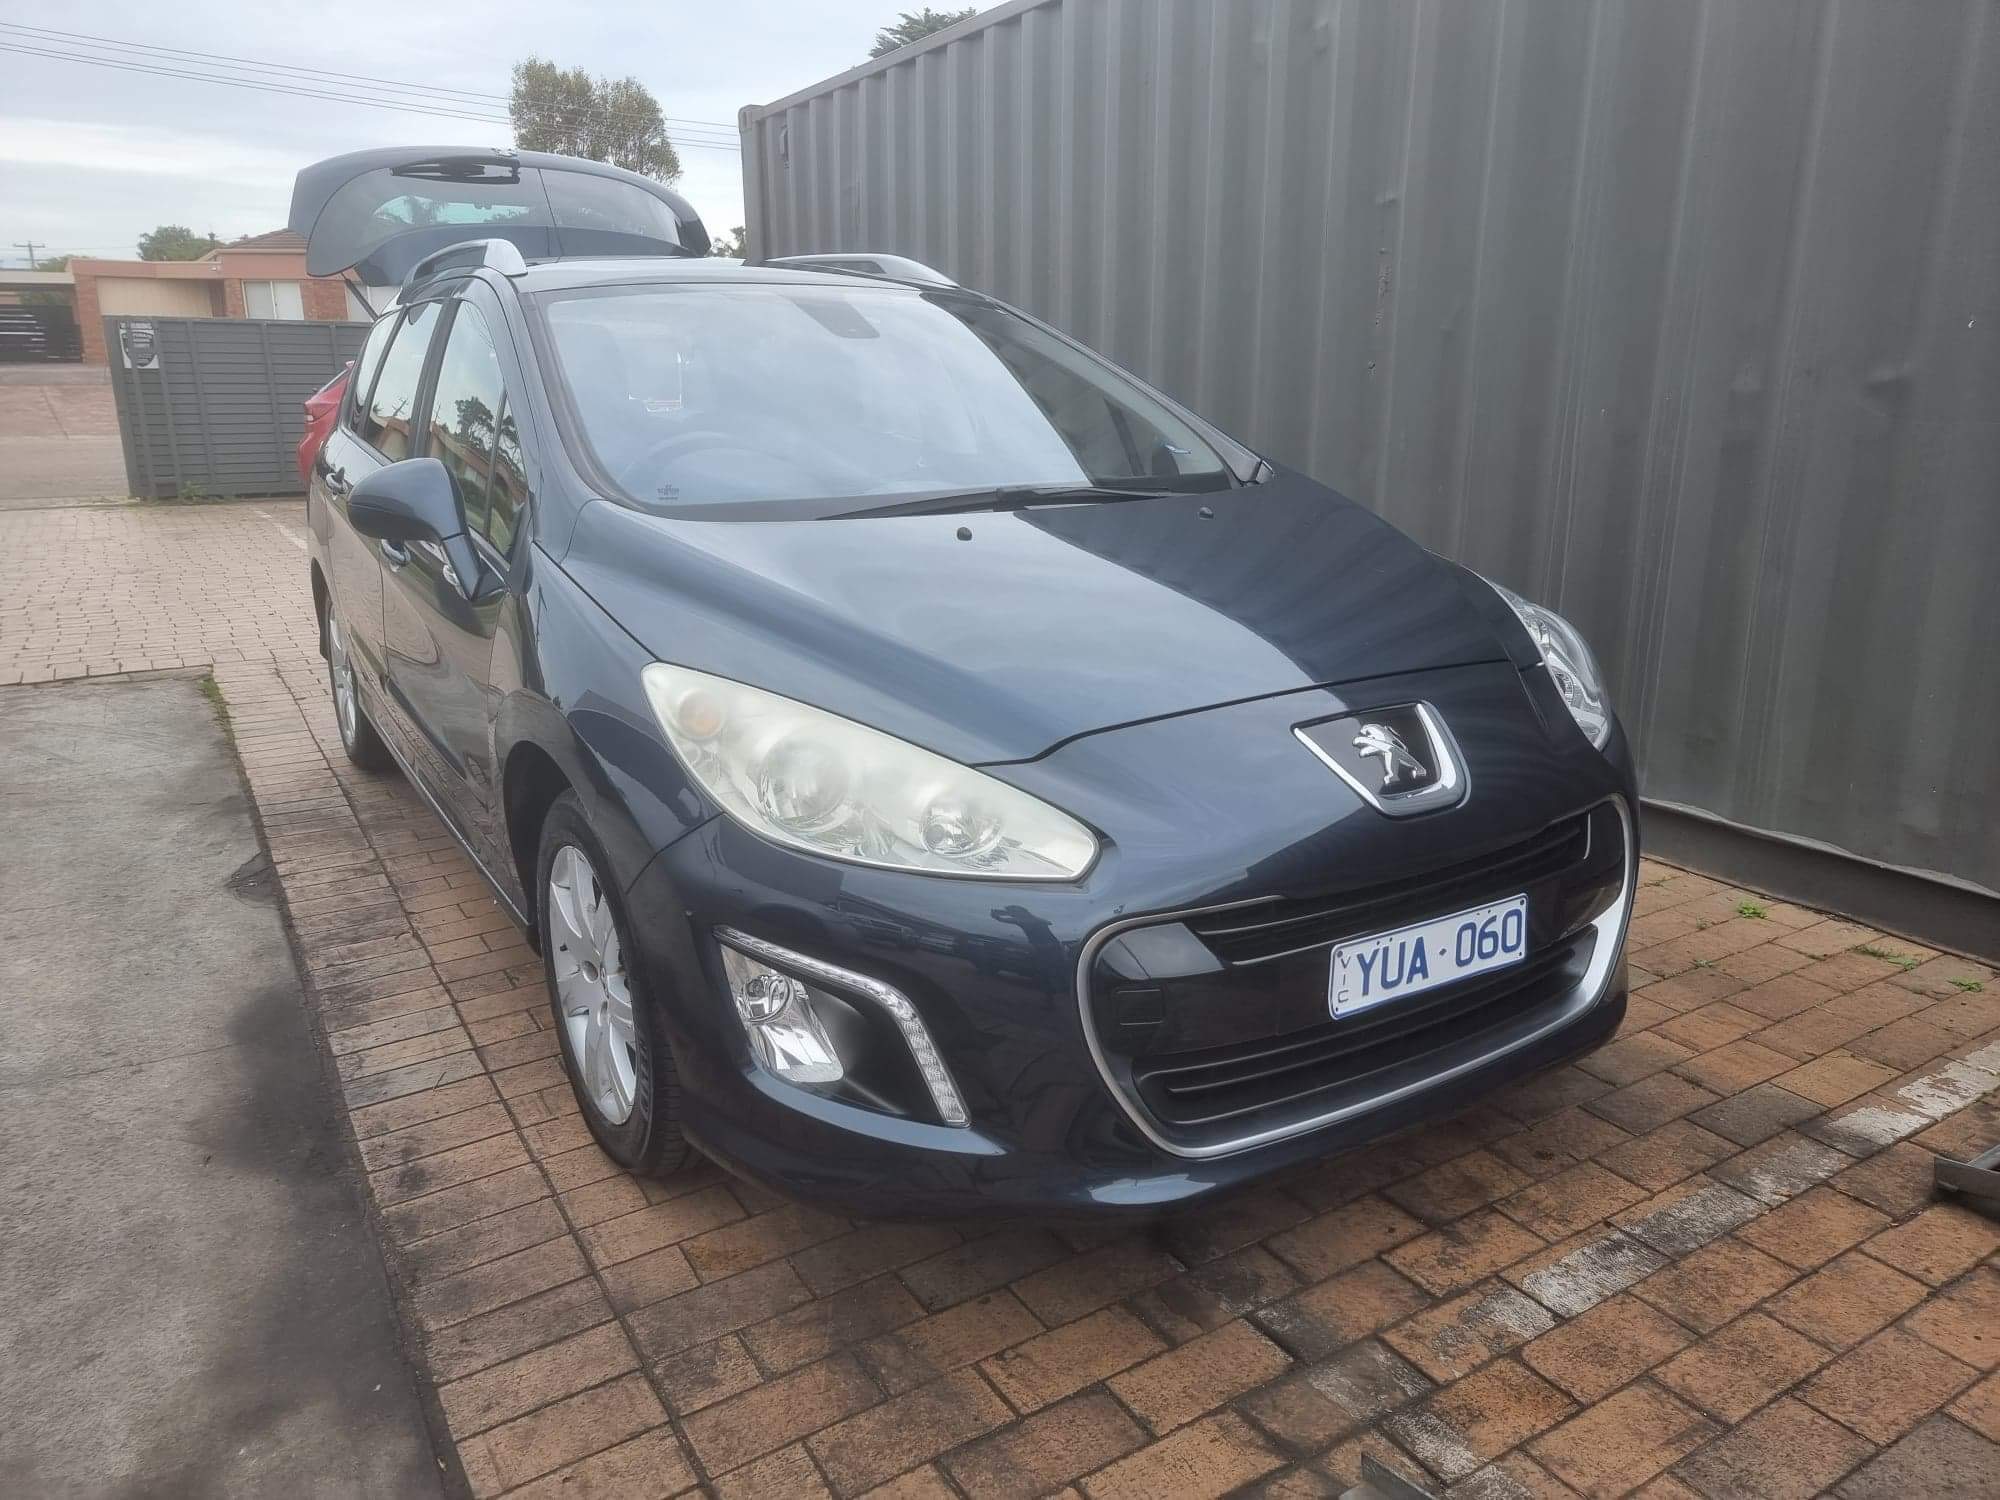 PEUGEOT 308 XSE T7 WAGON, AUTO  7 SEATER, LOW KMS 79,021